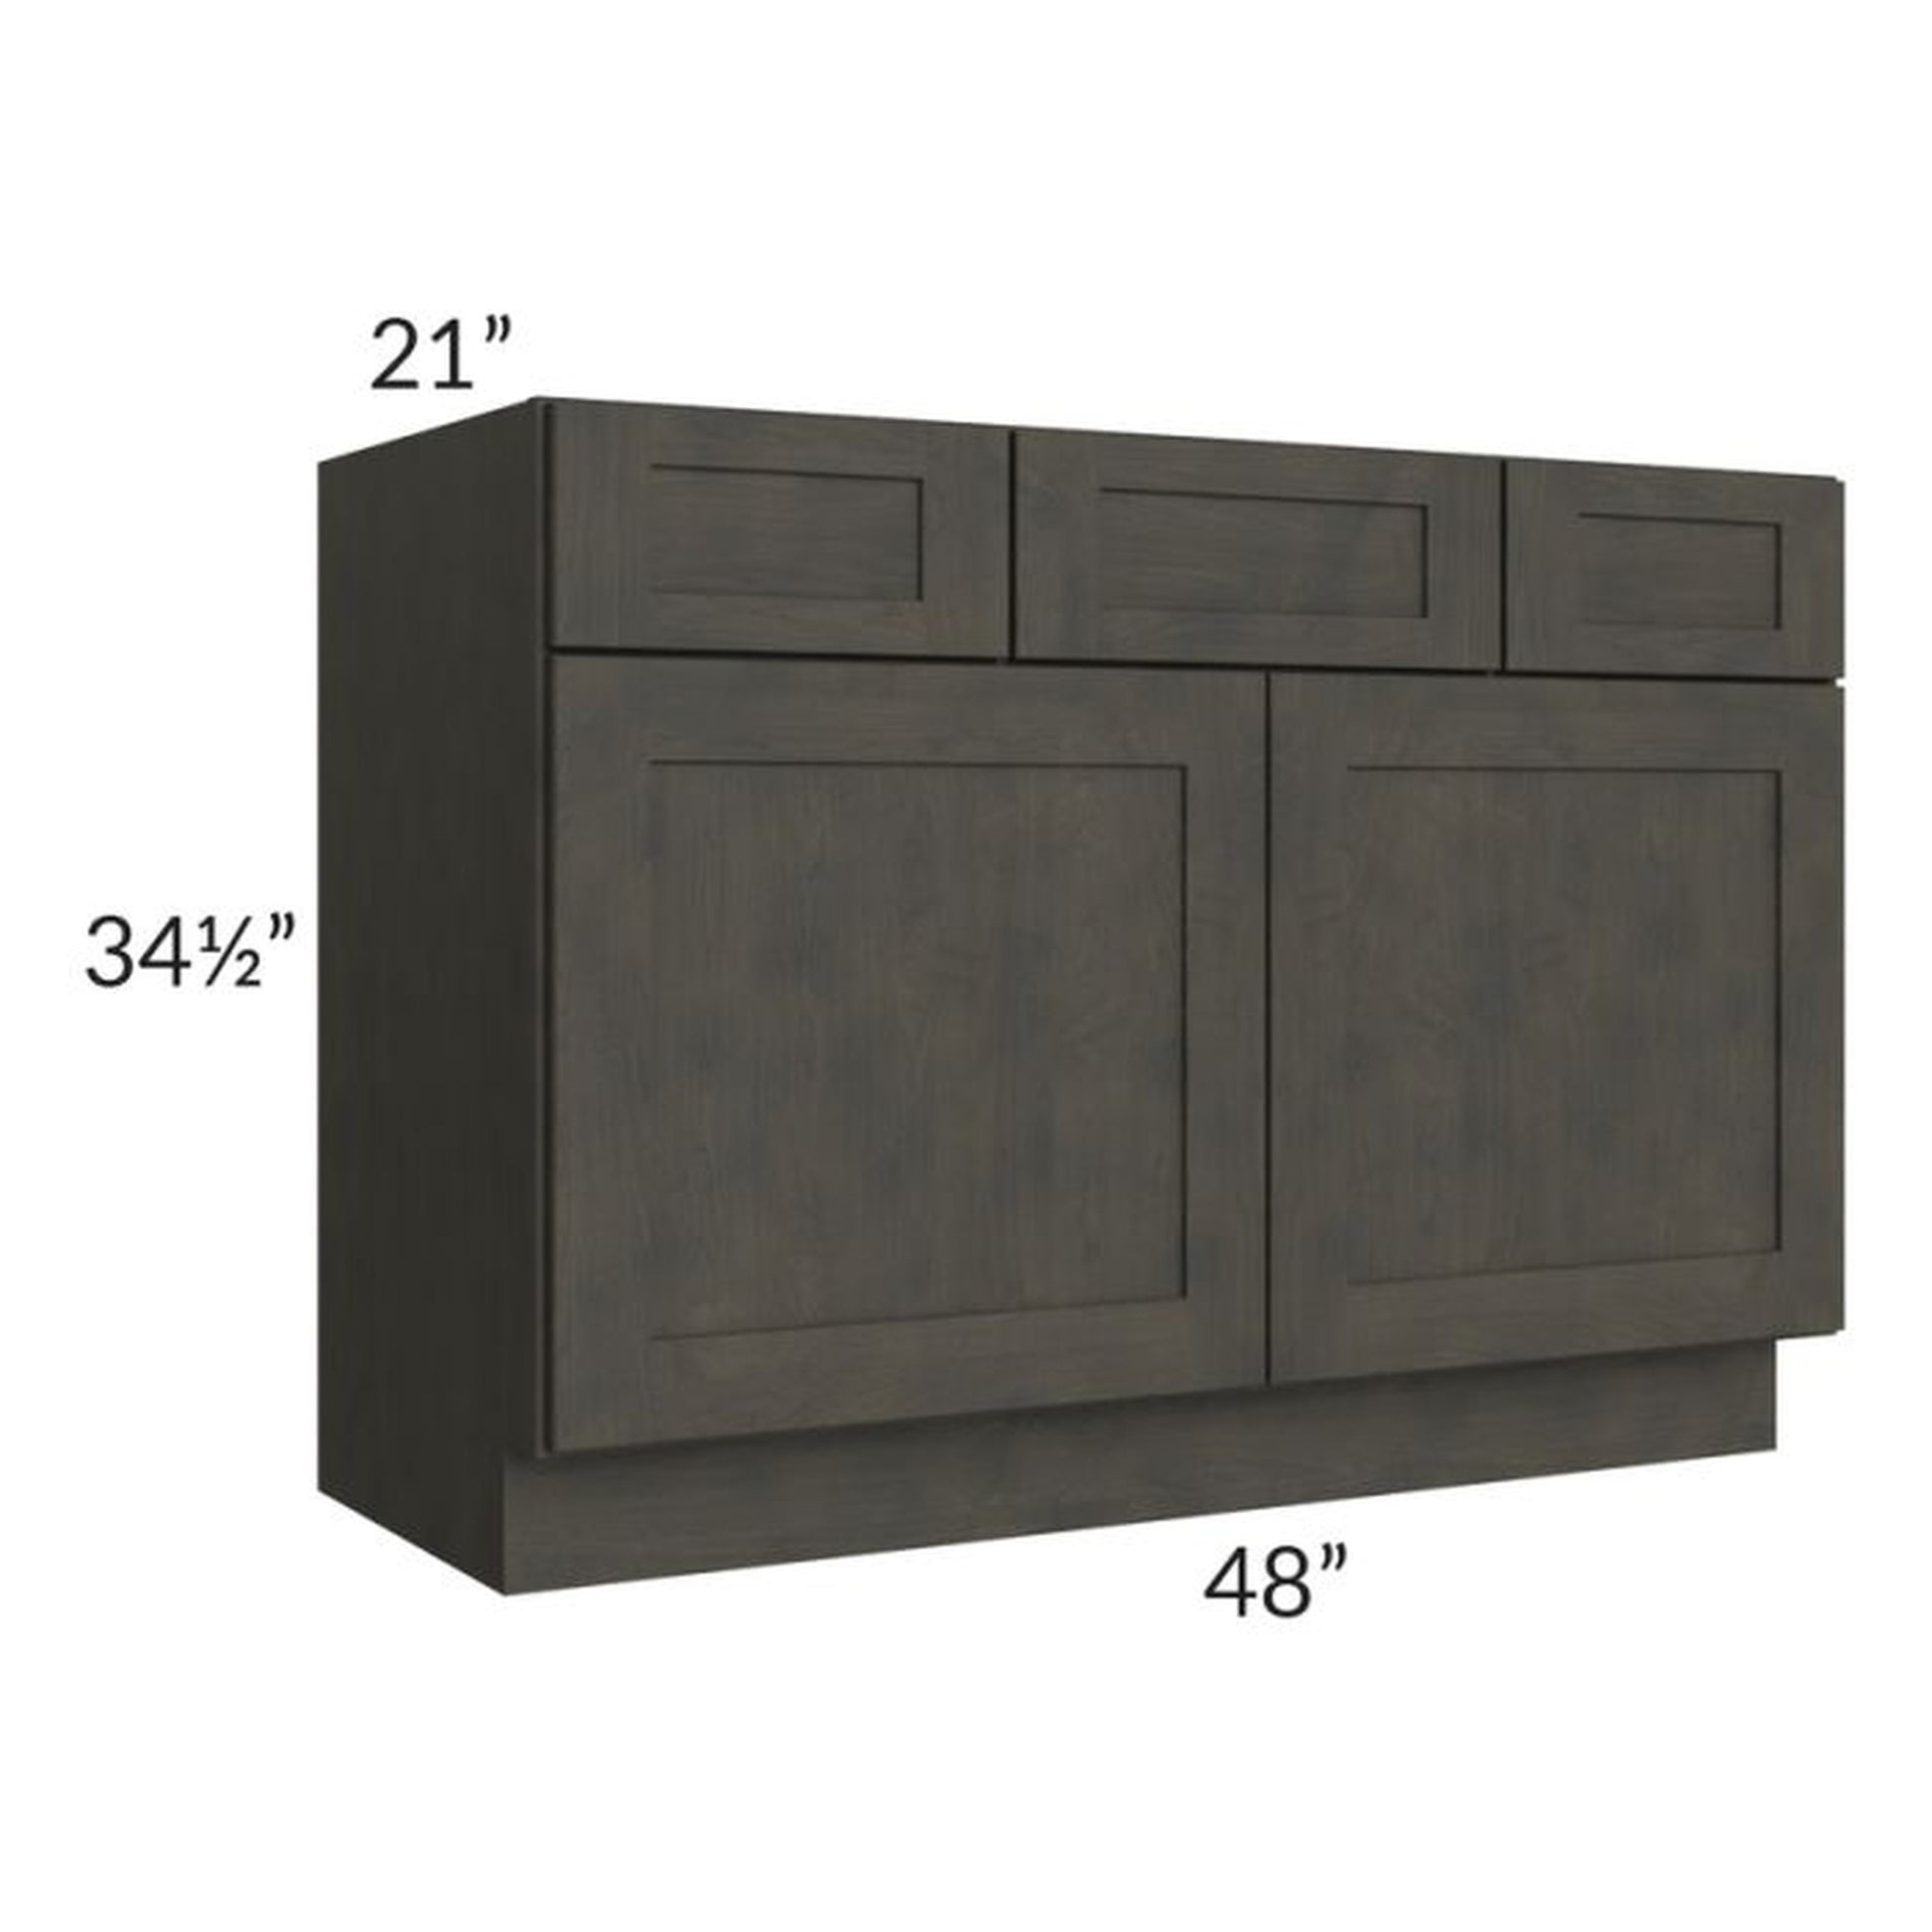 RTA Charcoal Grey Shaker 48" Vanity Base Cabinet with 1 Decorative End Panel